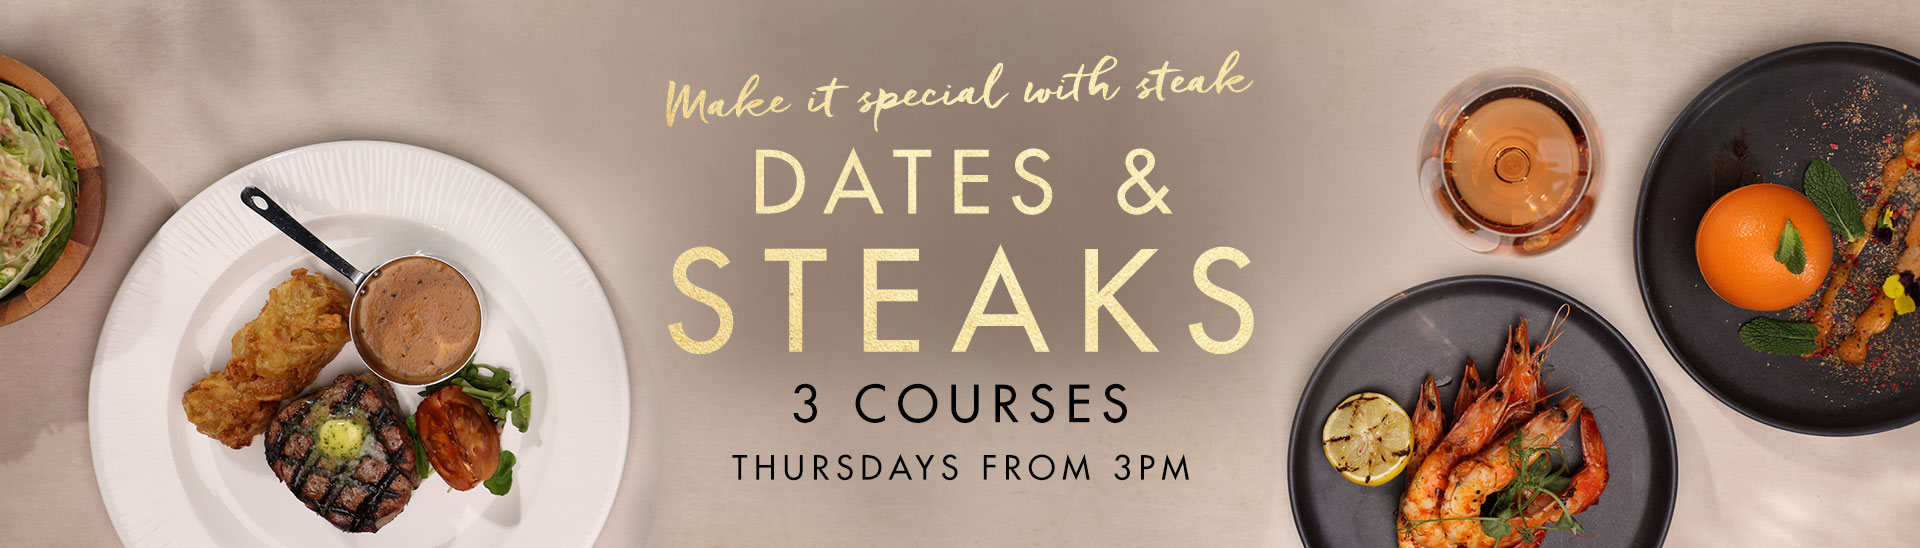 Dates & Steaks at Miller & Carter Cardiff Hayes